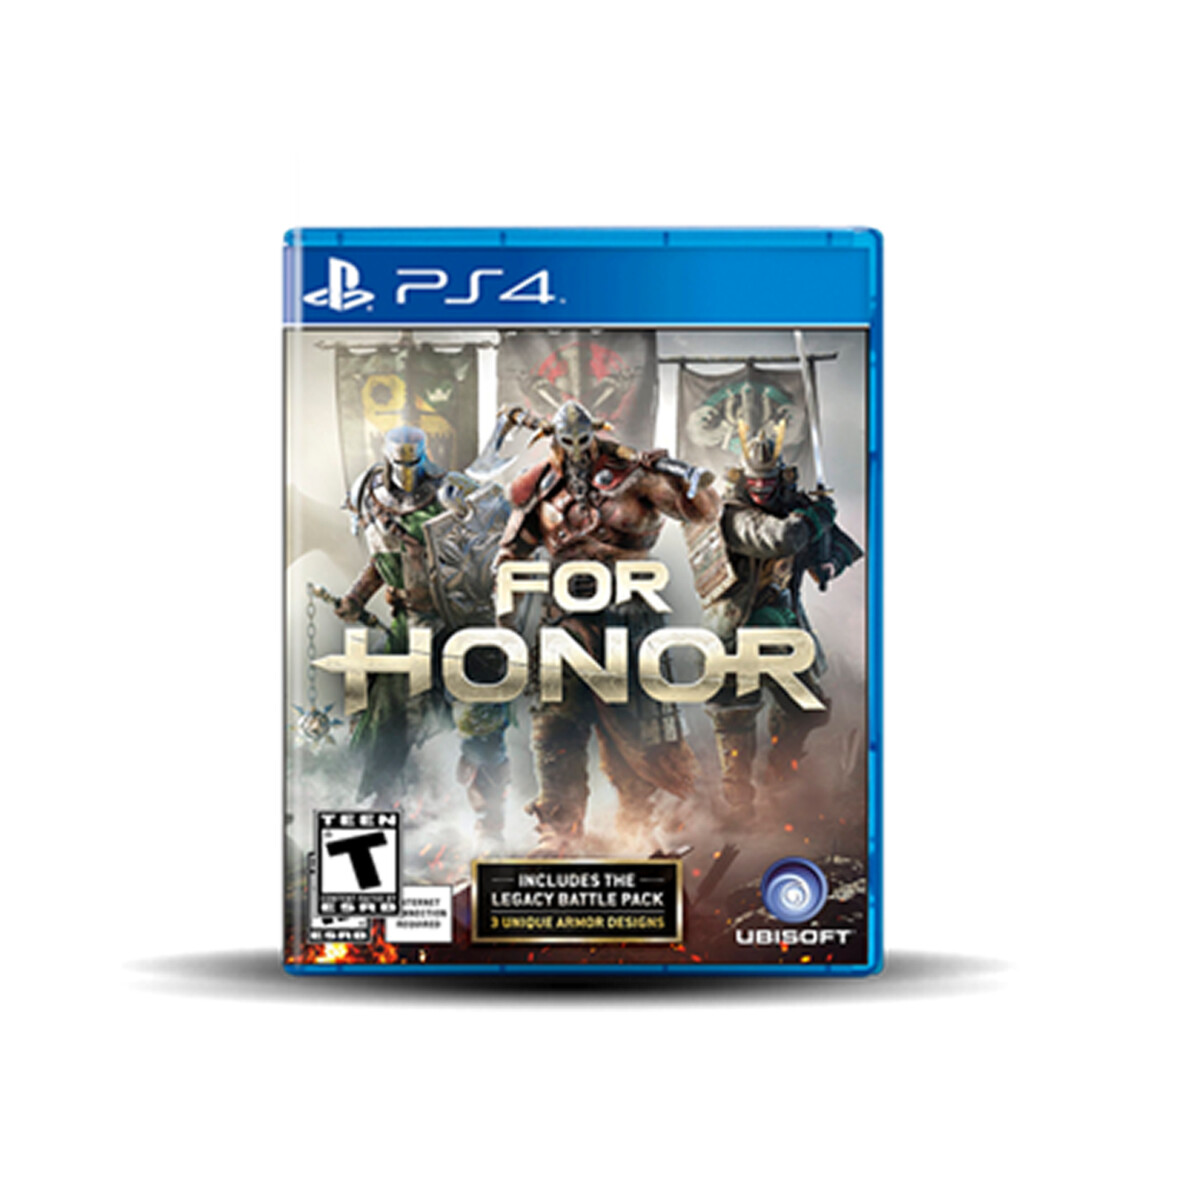 PS4 FOR HONOR 